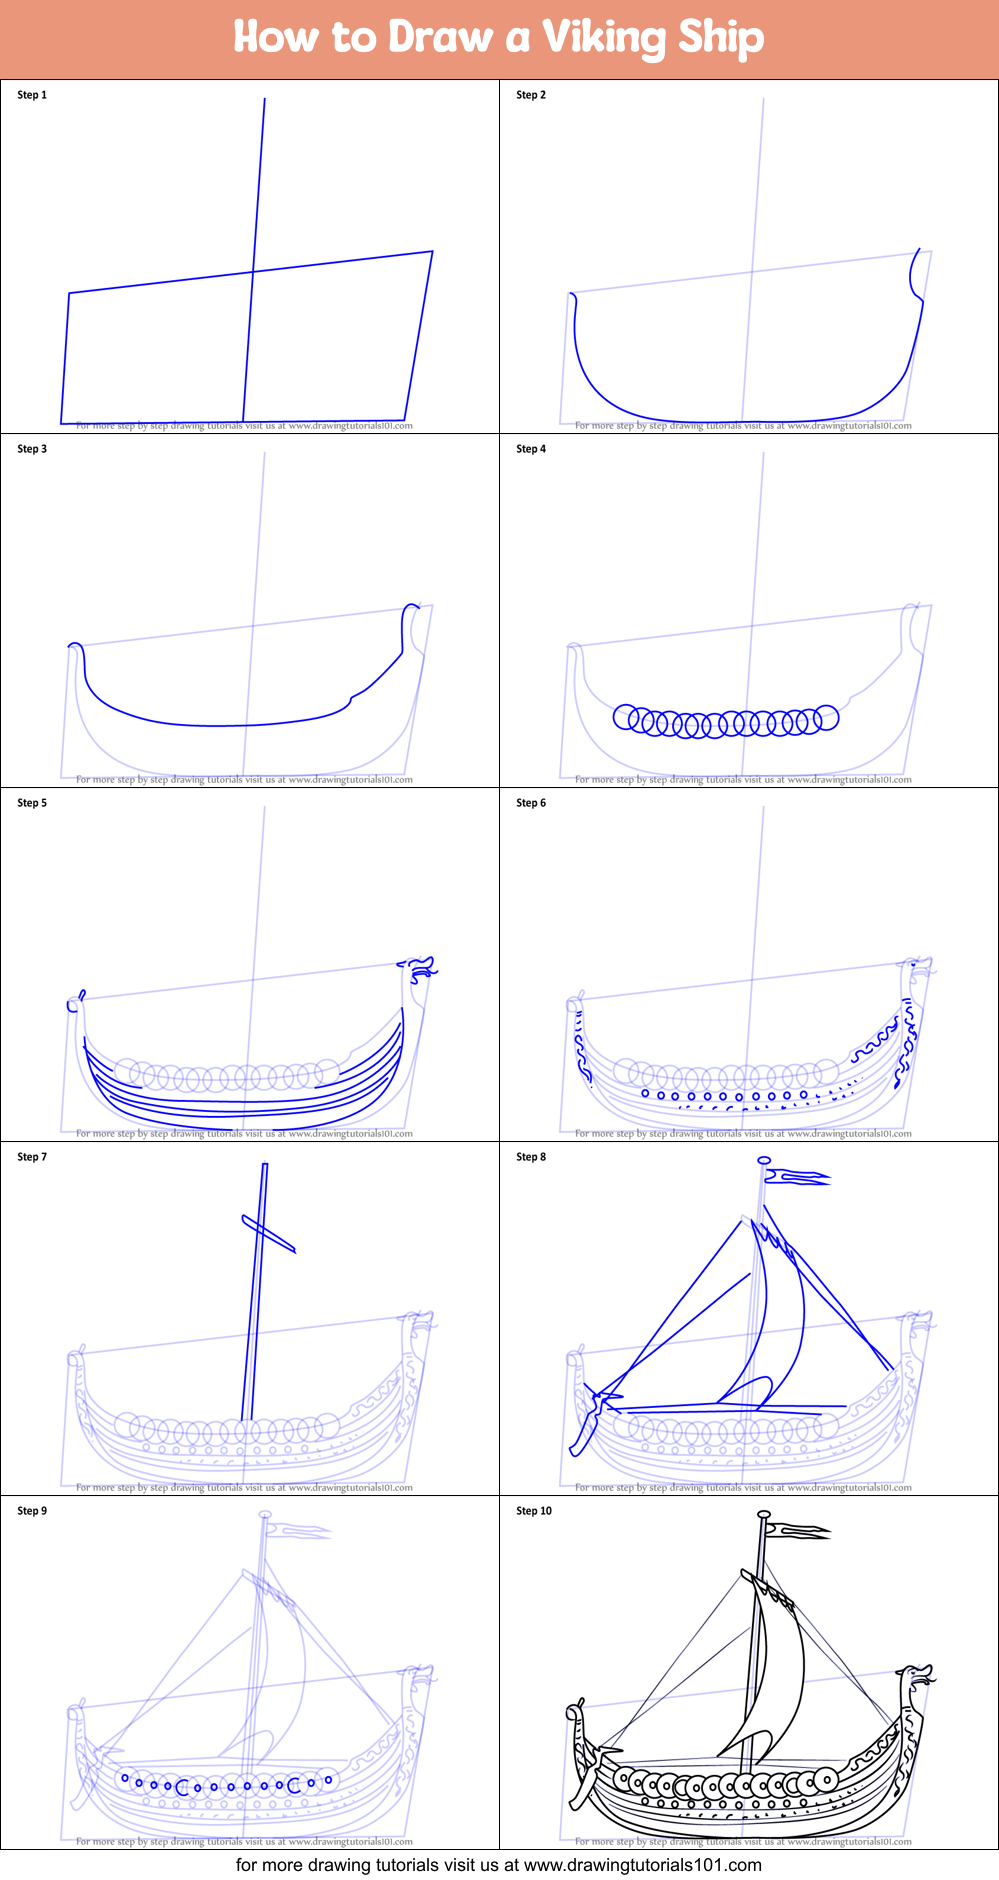 How to Draw a Viking Ship printable step by step drawing sheet